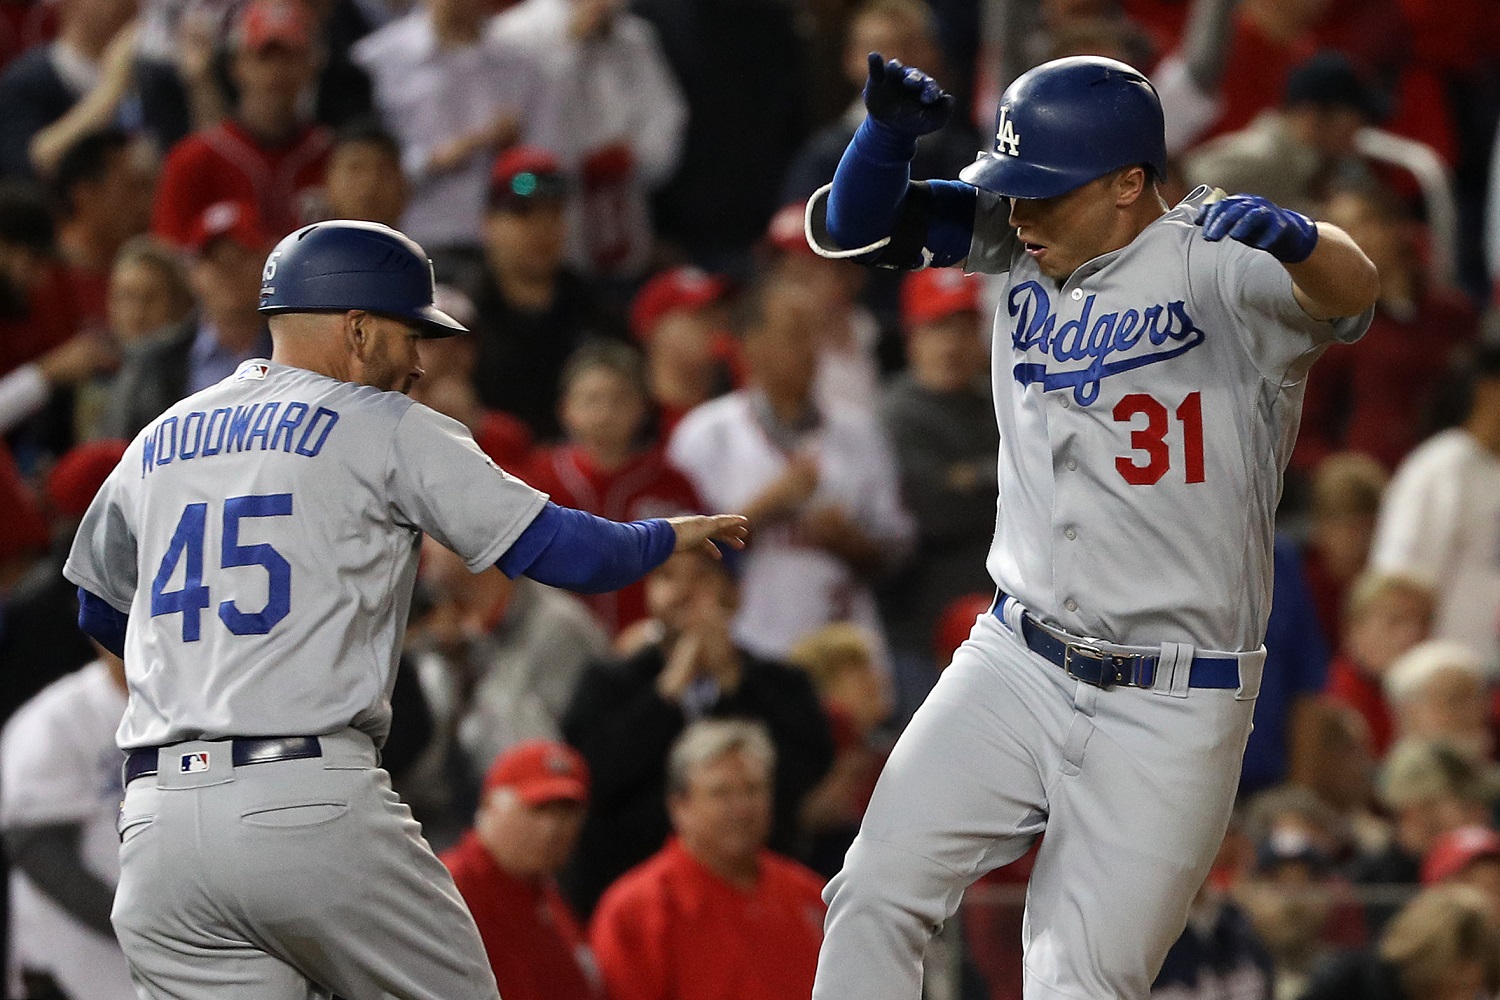 WASHINGTON, DC - OCTOBER 13: Joc Pederson #31 of the Los Angeles Dodgers celebrates with third base coach Chris Woodward #45 after hitting a solo home run in the seventh inning against the Washington Nationals during game five of the National League Division Series at Nationals Park on October 13, 2016 in Washington, DC. (Photo by Patrick Smith/Getty Images)